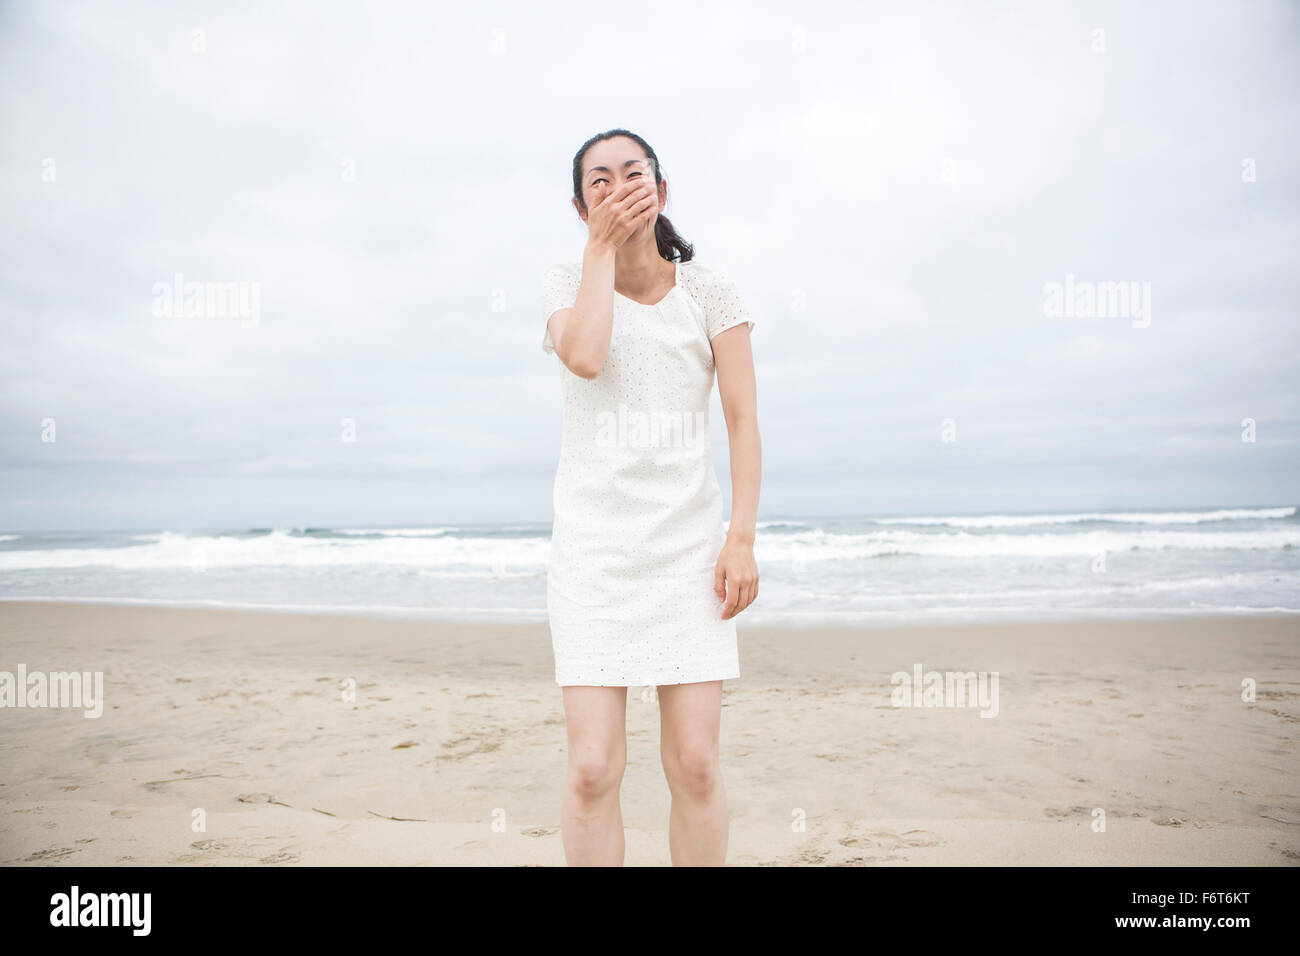 Woman laughing on beach Stock Photo